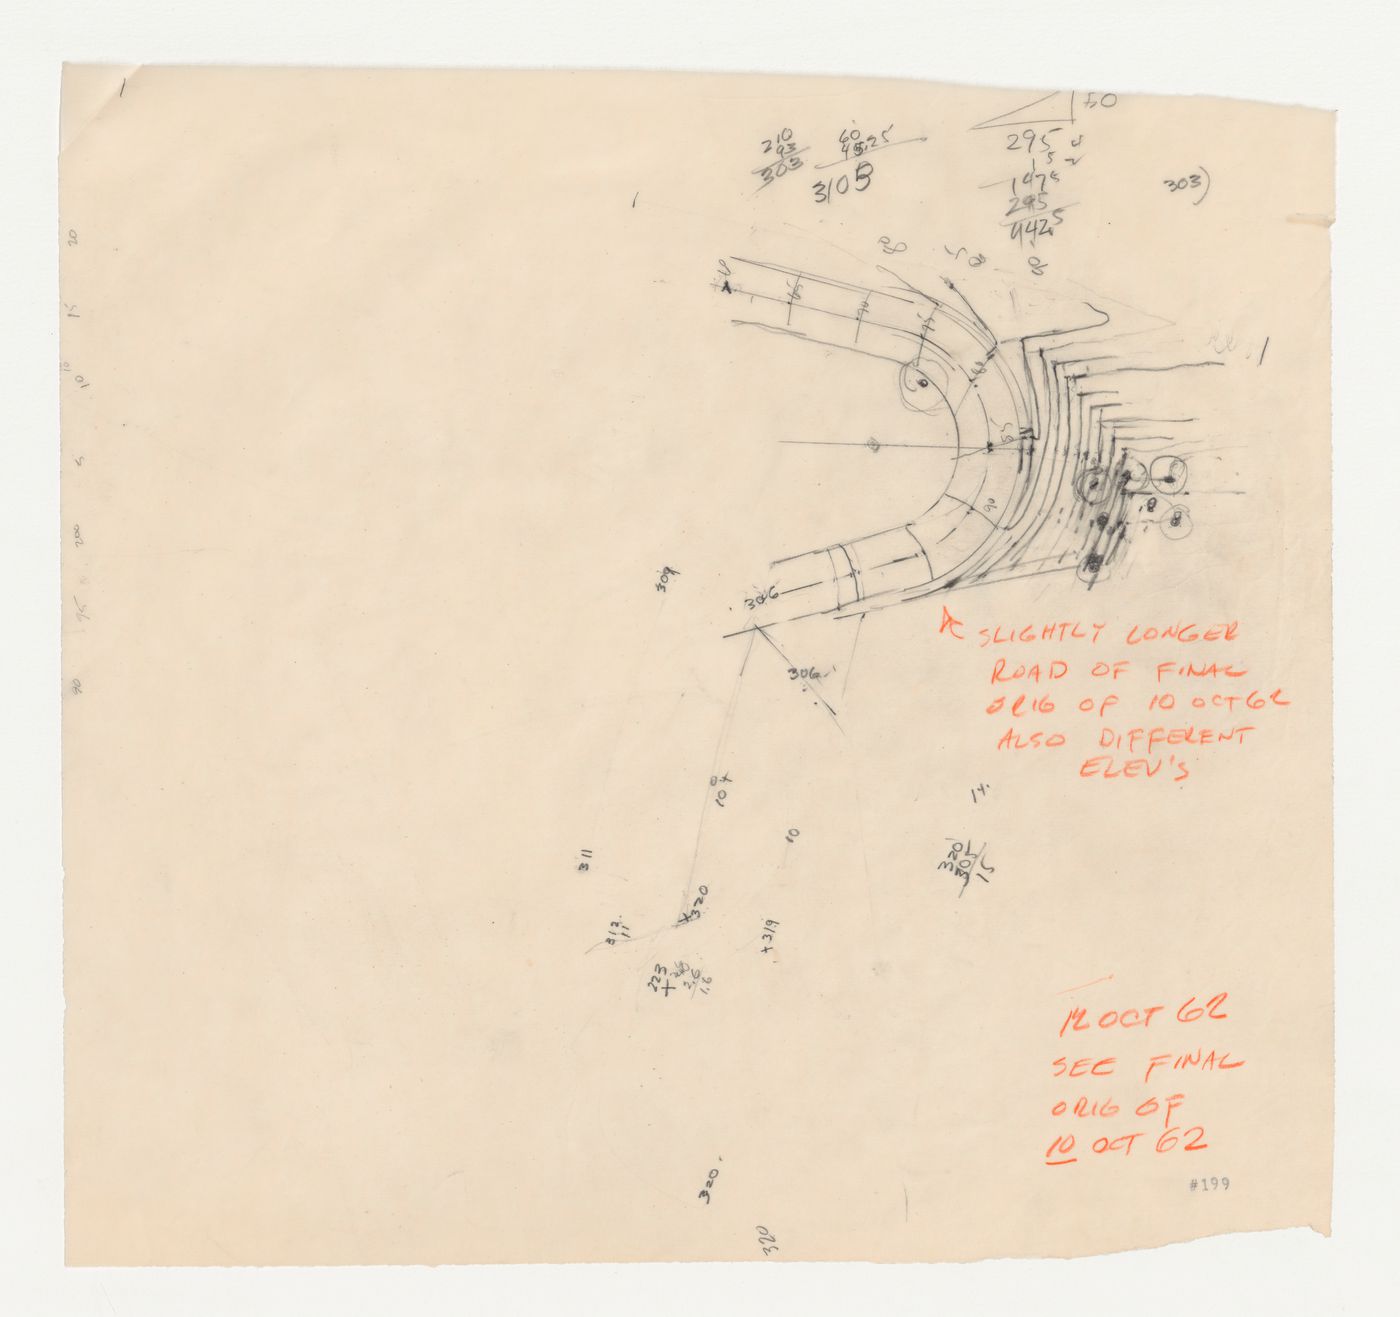 Swedenborg Memorial Chapel, El Cerrito, California: Plan for the access road, showing the grading above the final bend